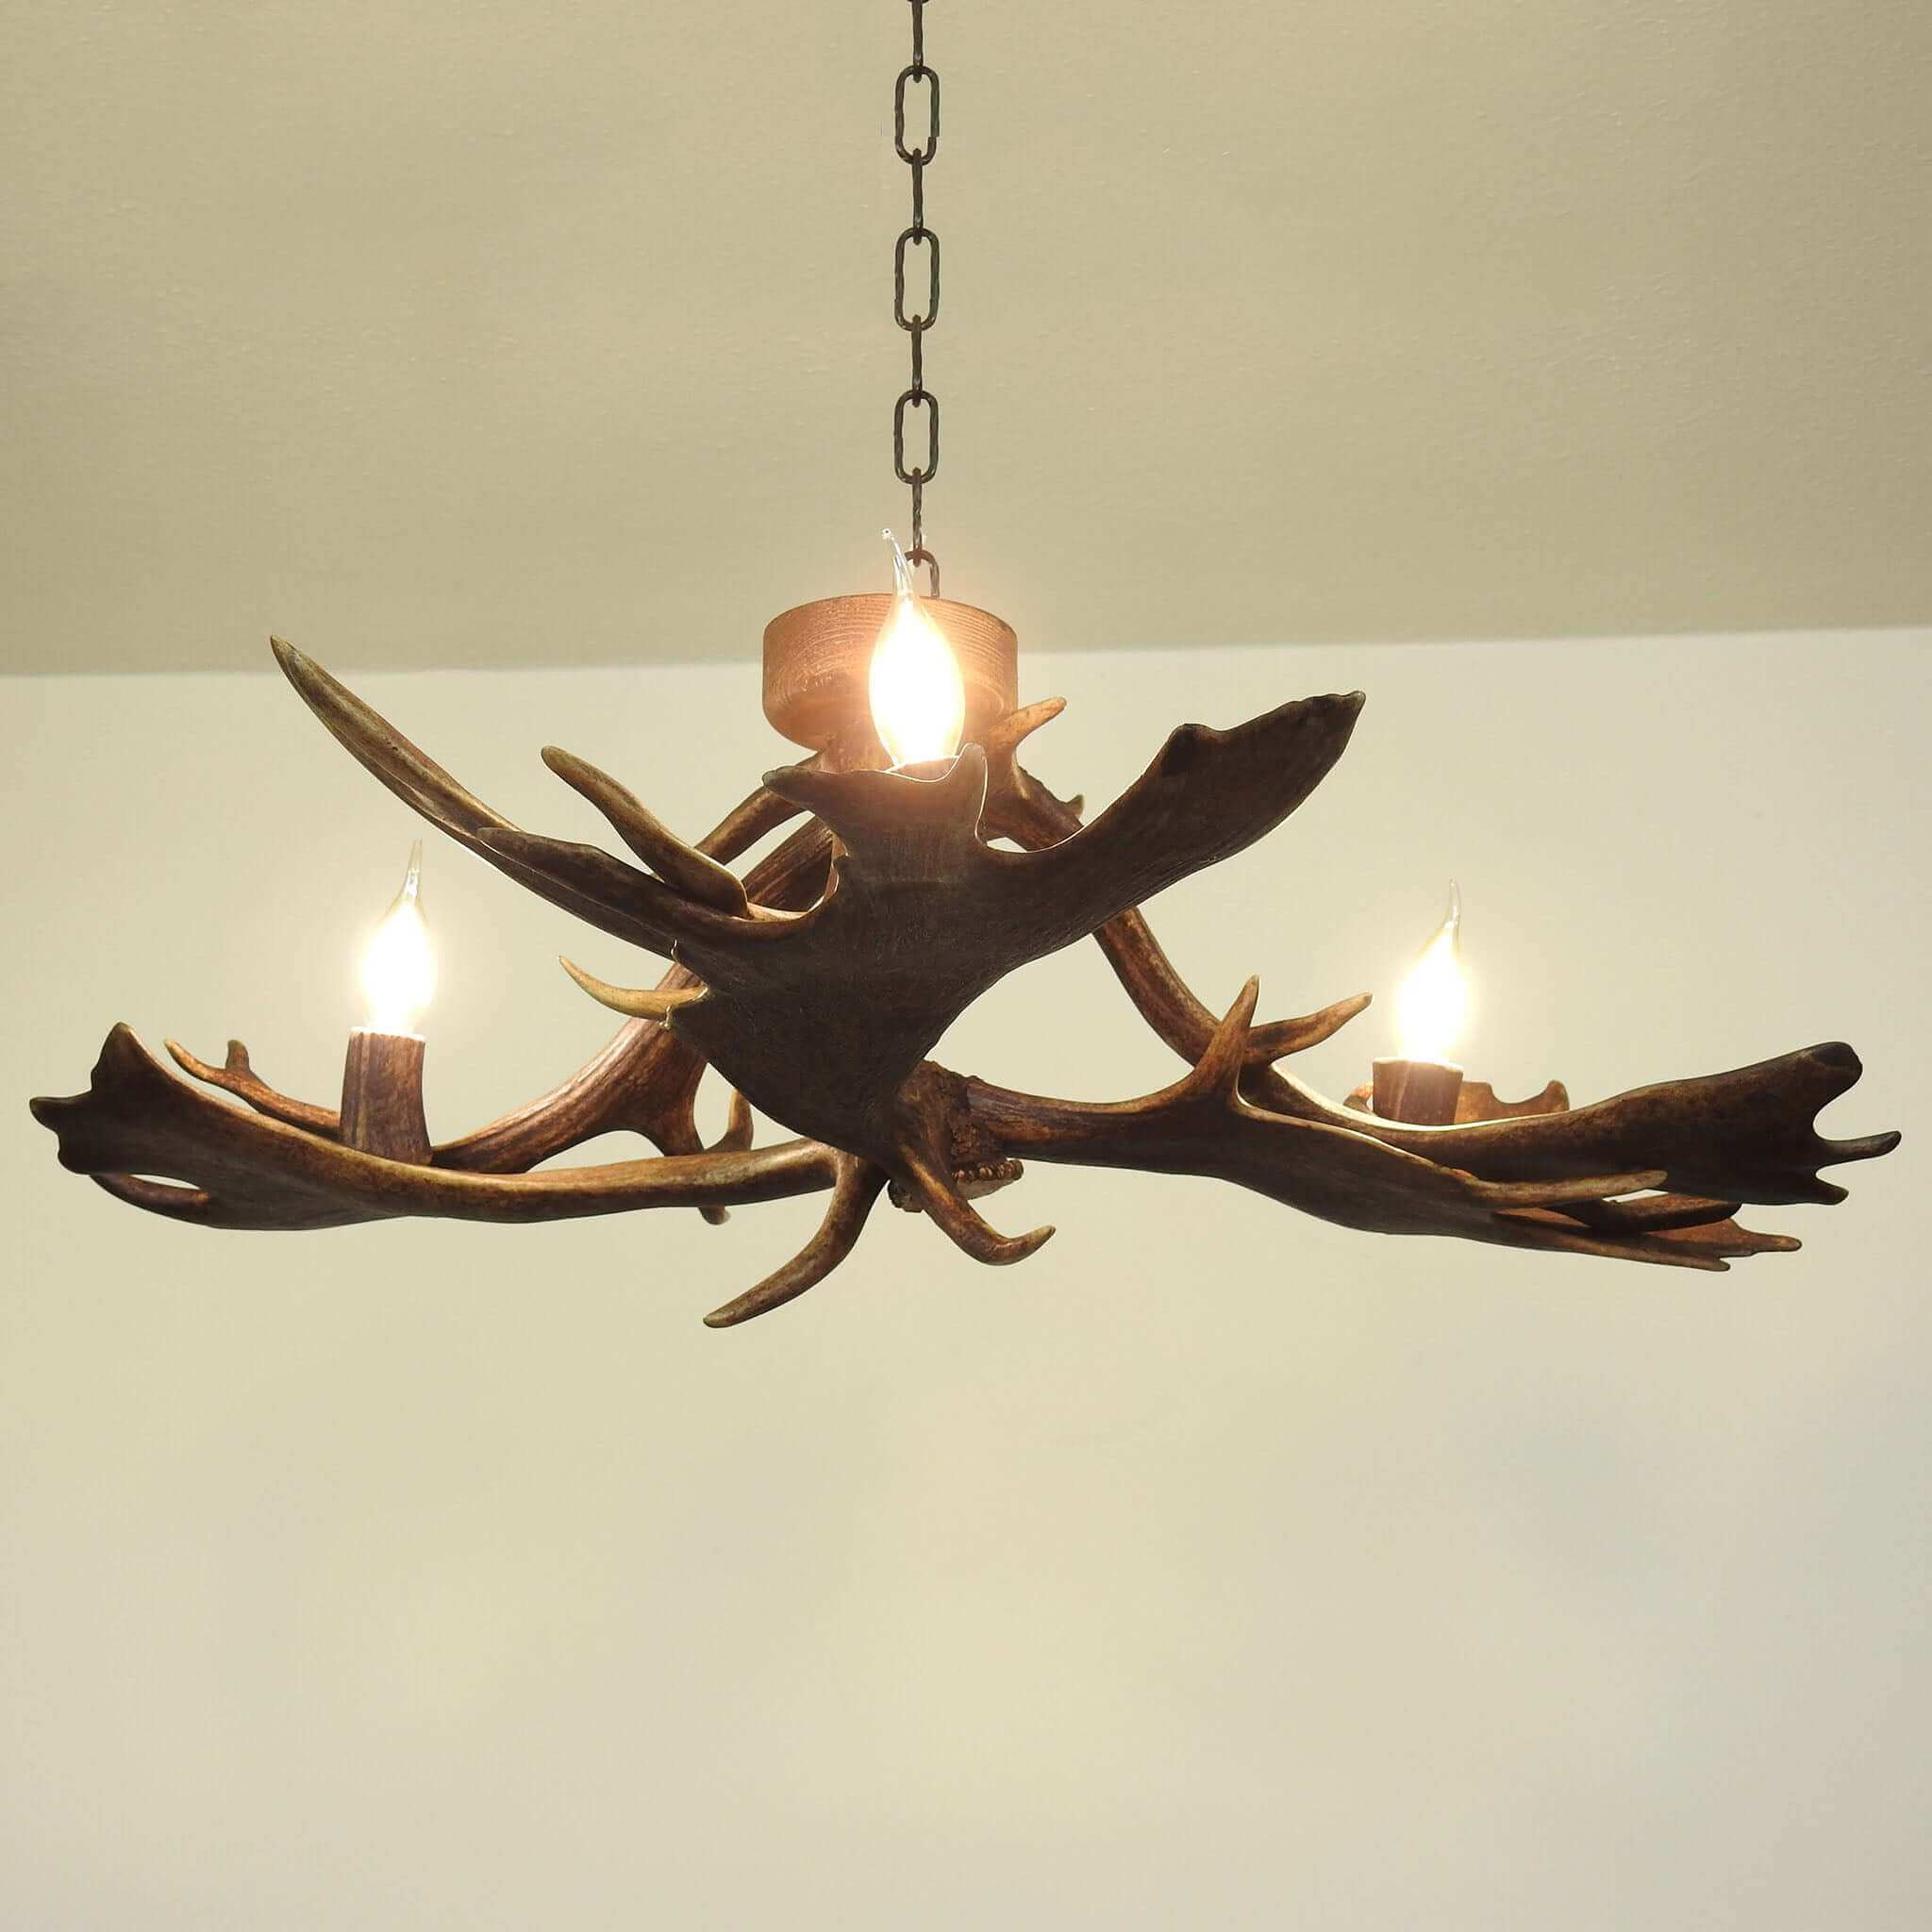 Real antler lighting for low ceiling room.